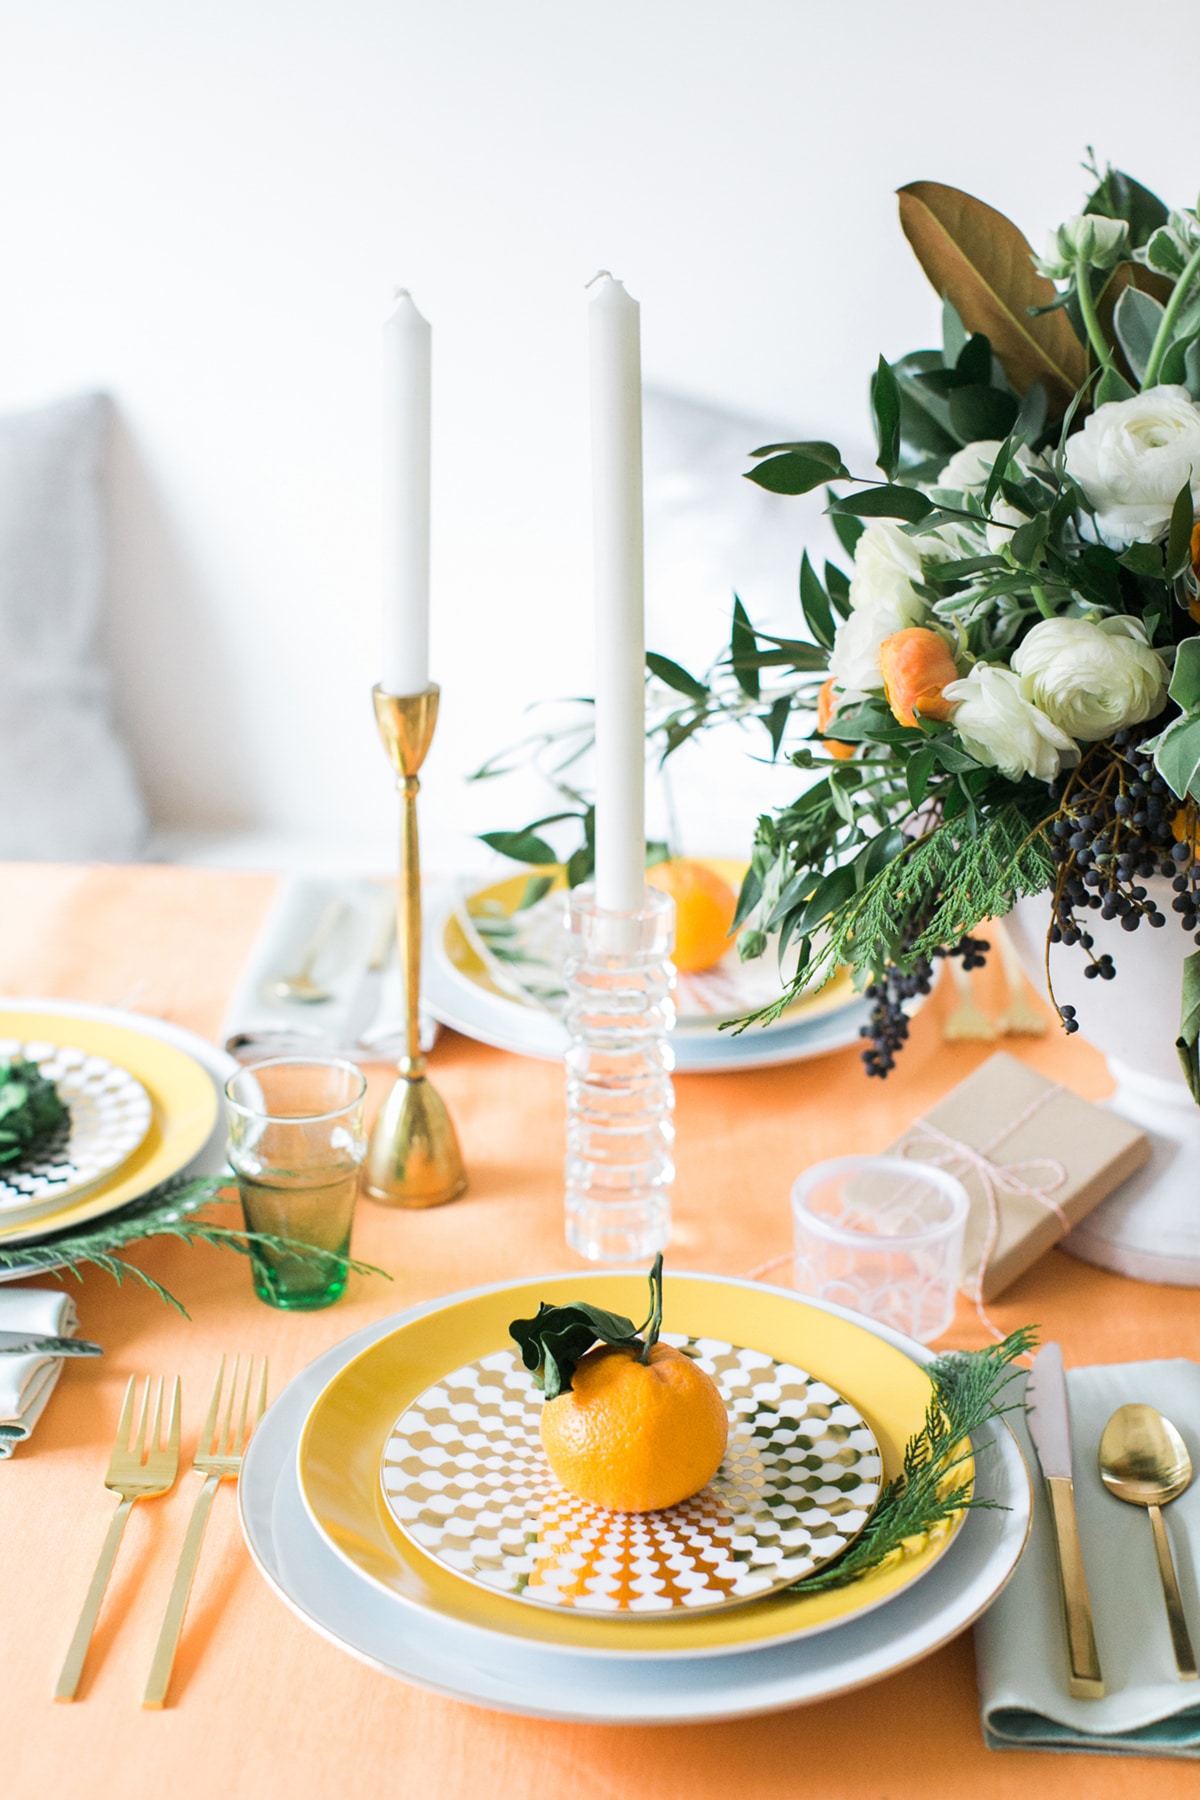 A Very Citrus Christmas! | holiday tabletop by coco kelley